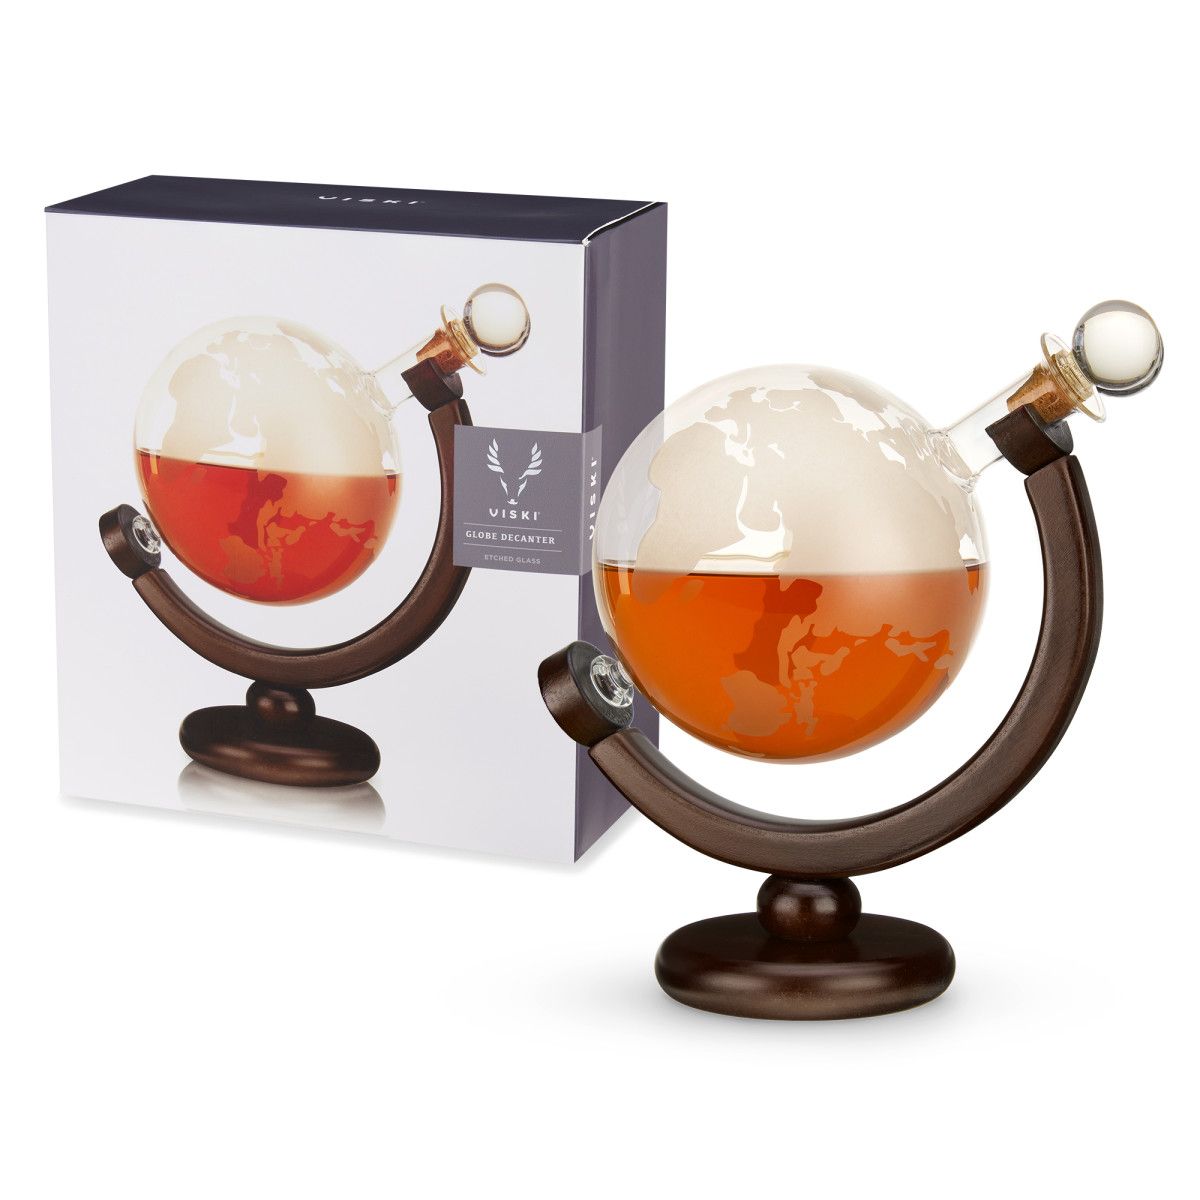 Better Homes & Gardens Glass Wine Decanter with Wooden Sphere